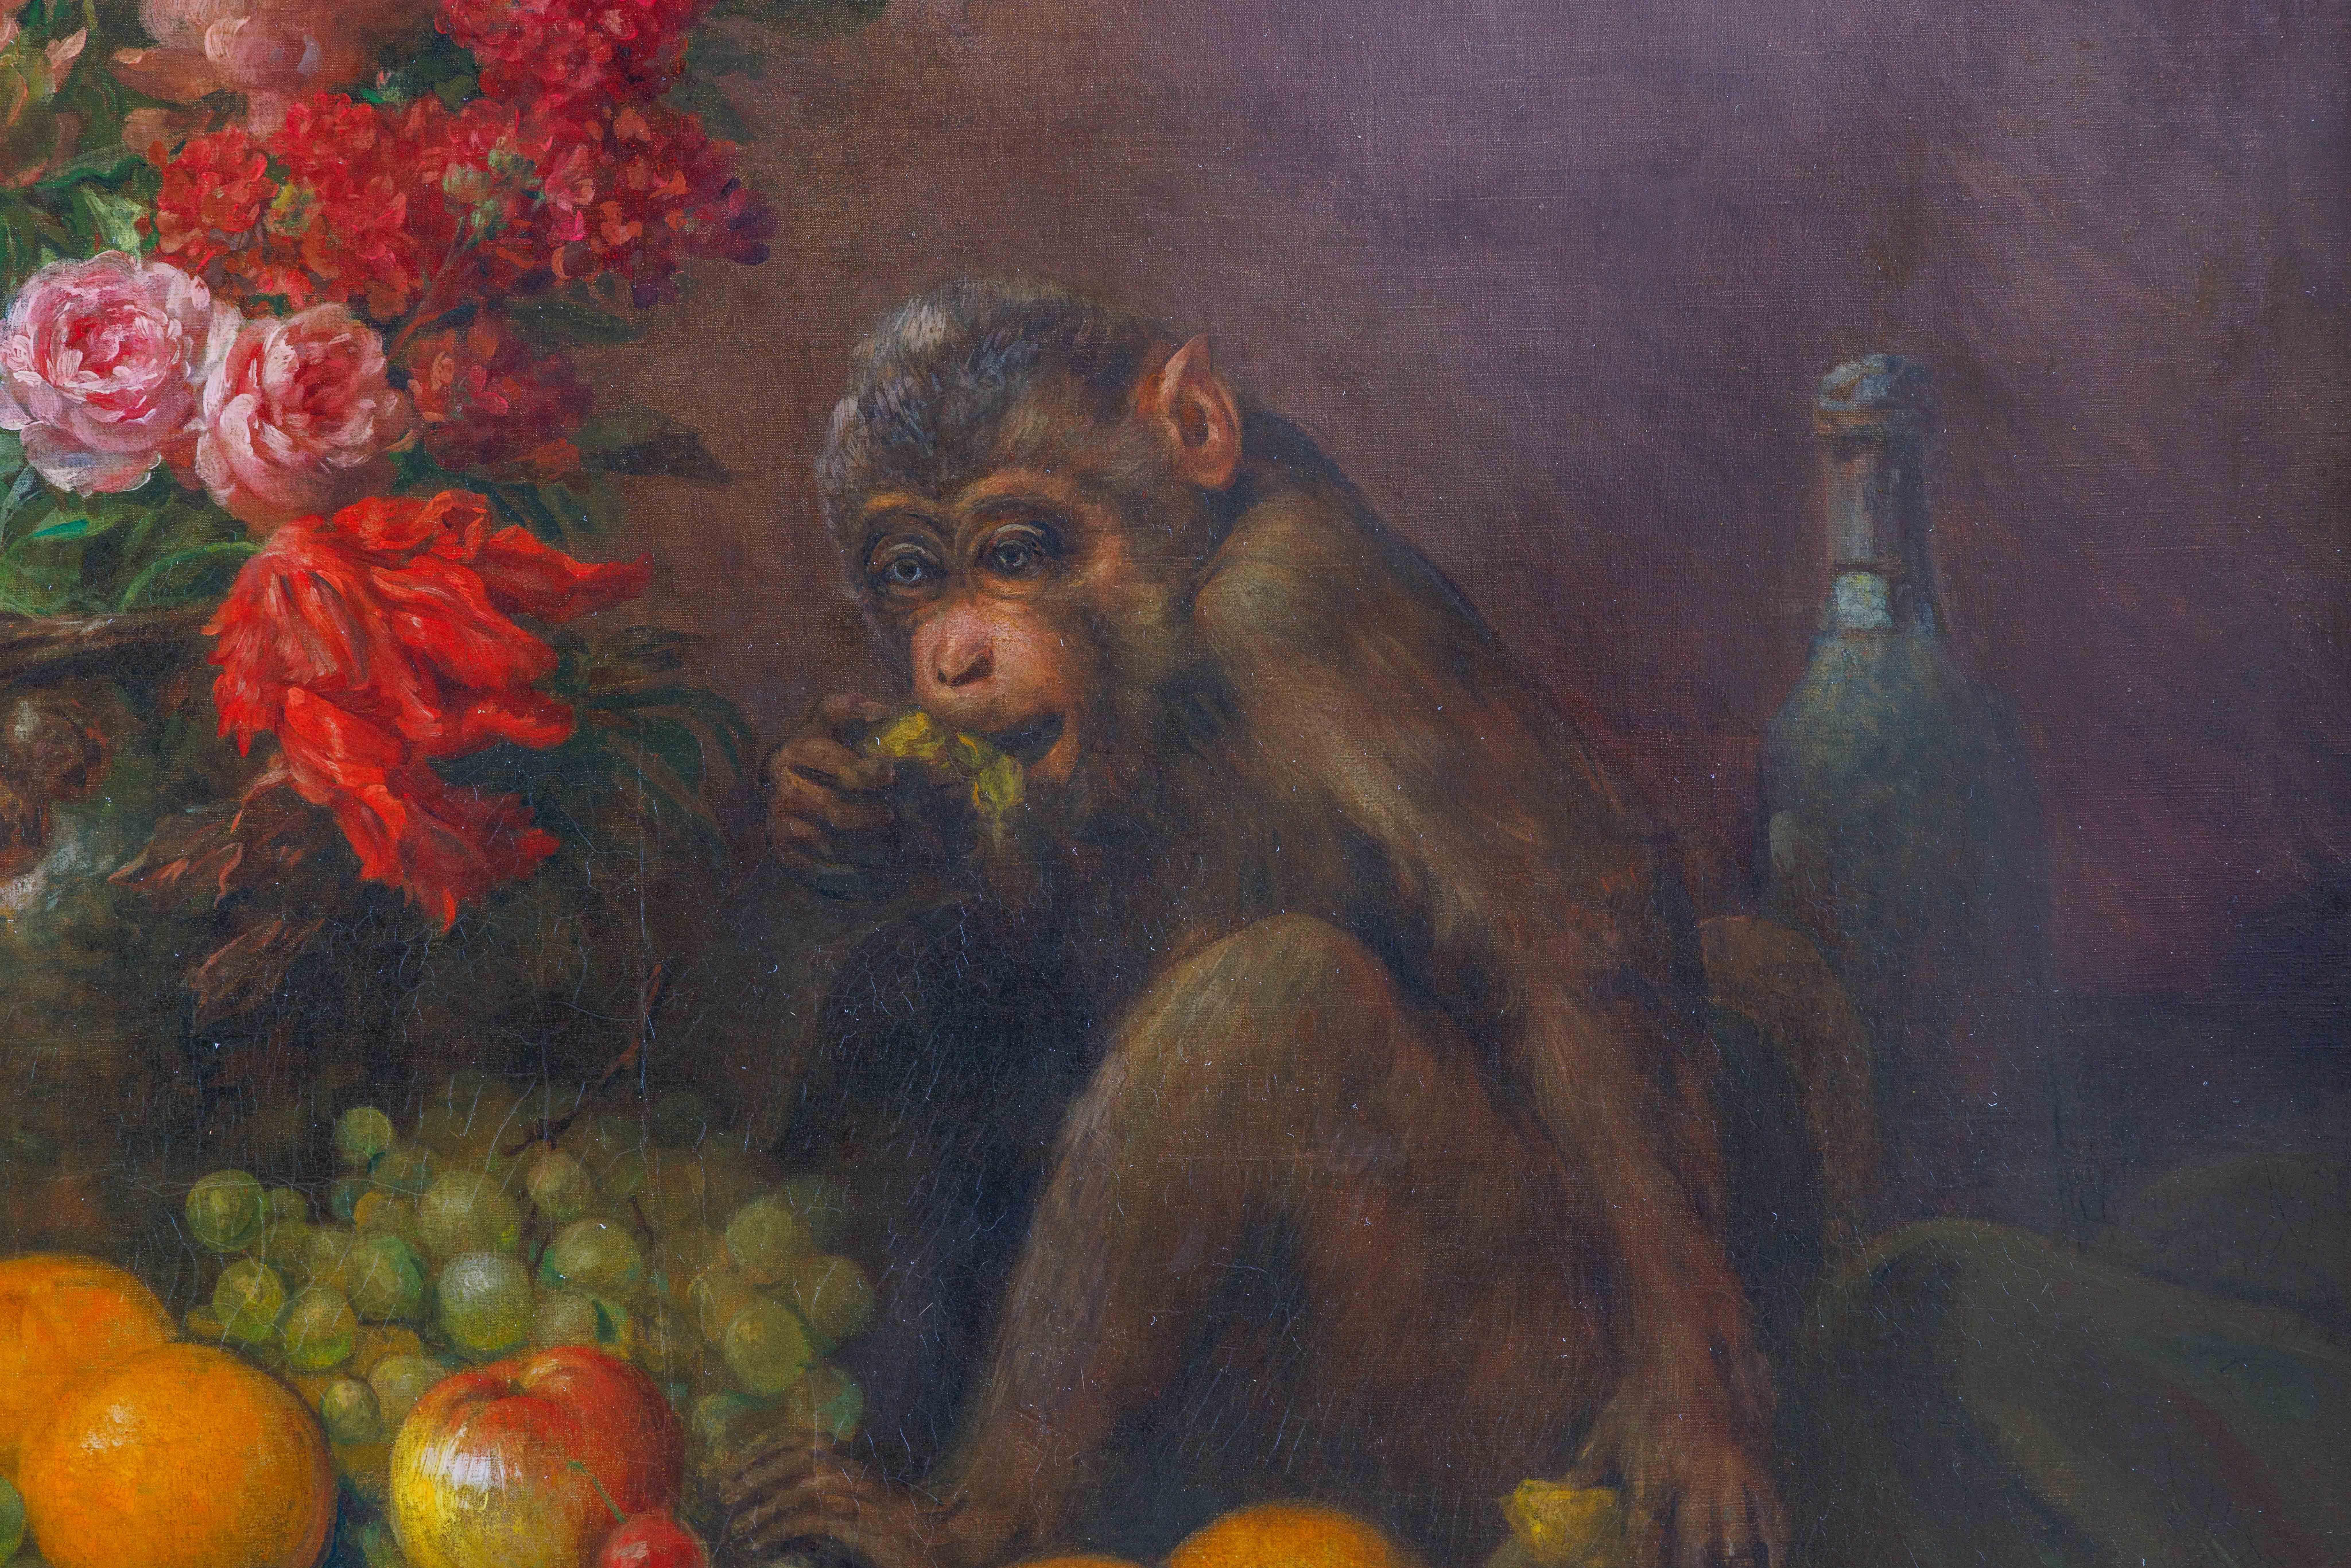 Edmond Louis Maire (French, 1862-1914) A Monkey Still Life Painting, 1904 For Sale 2